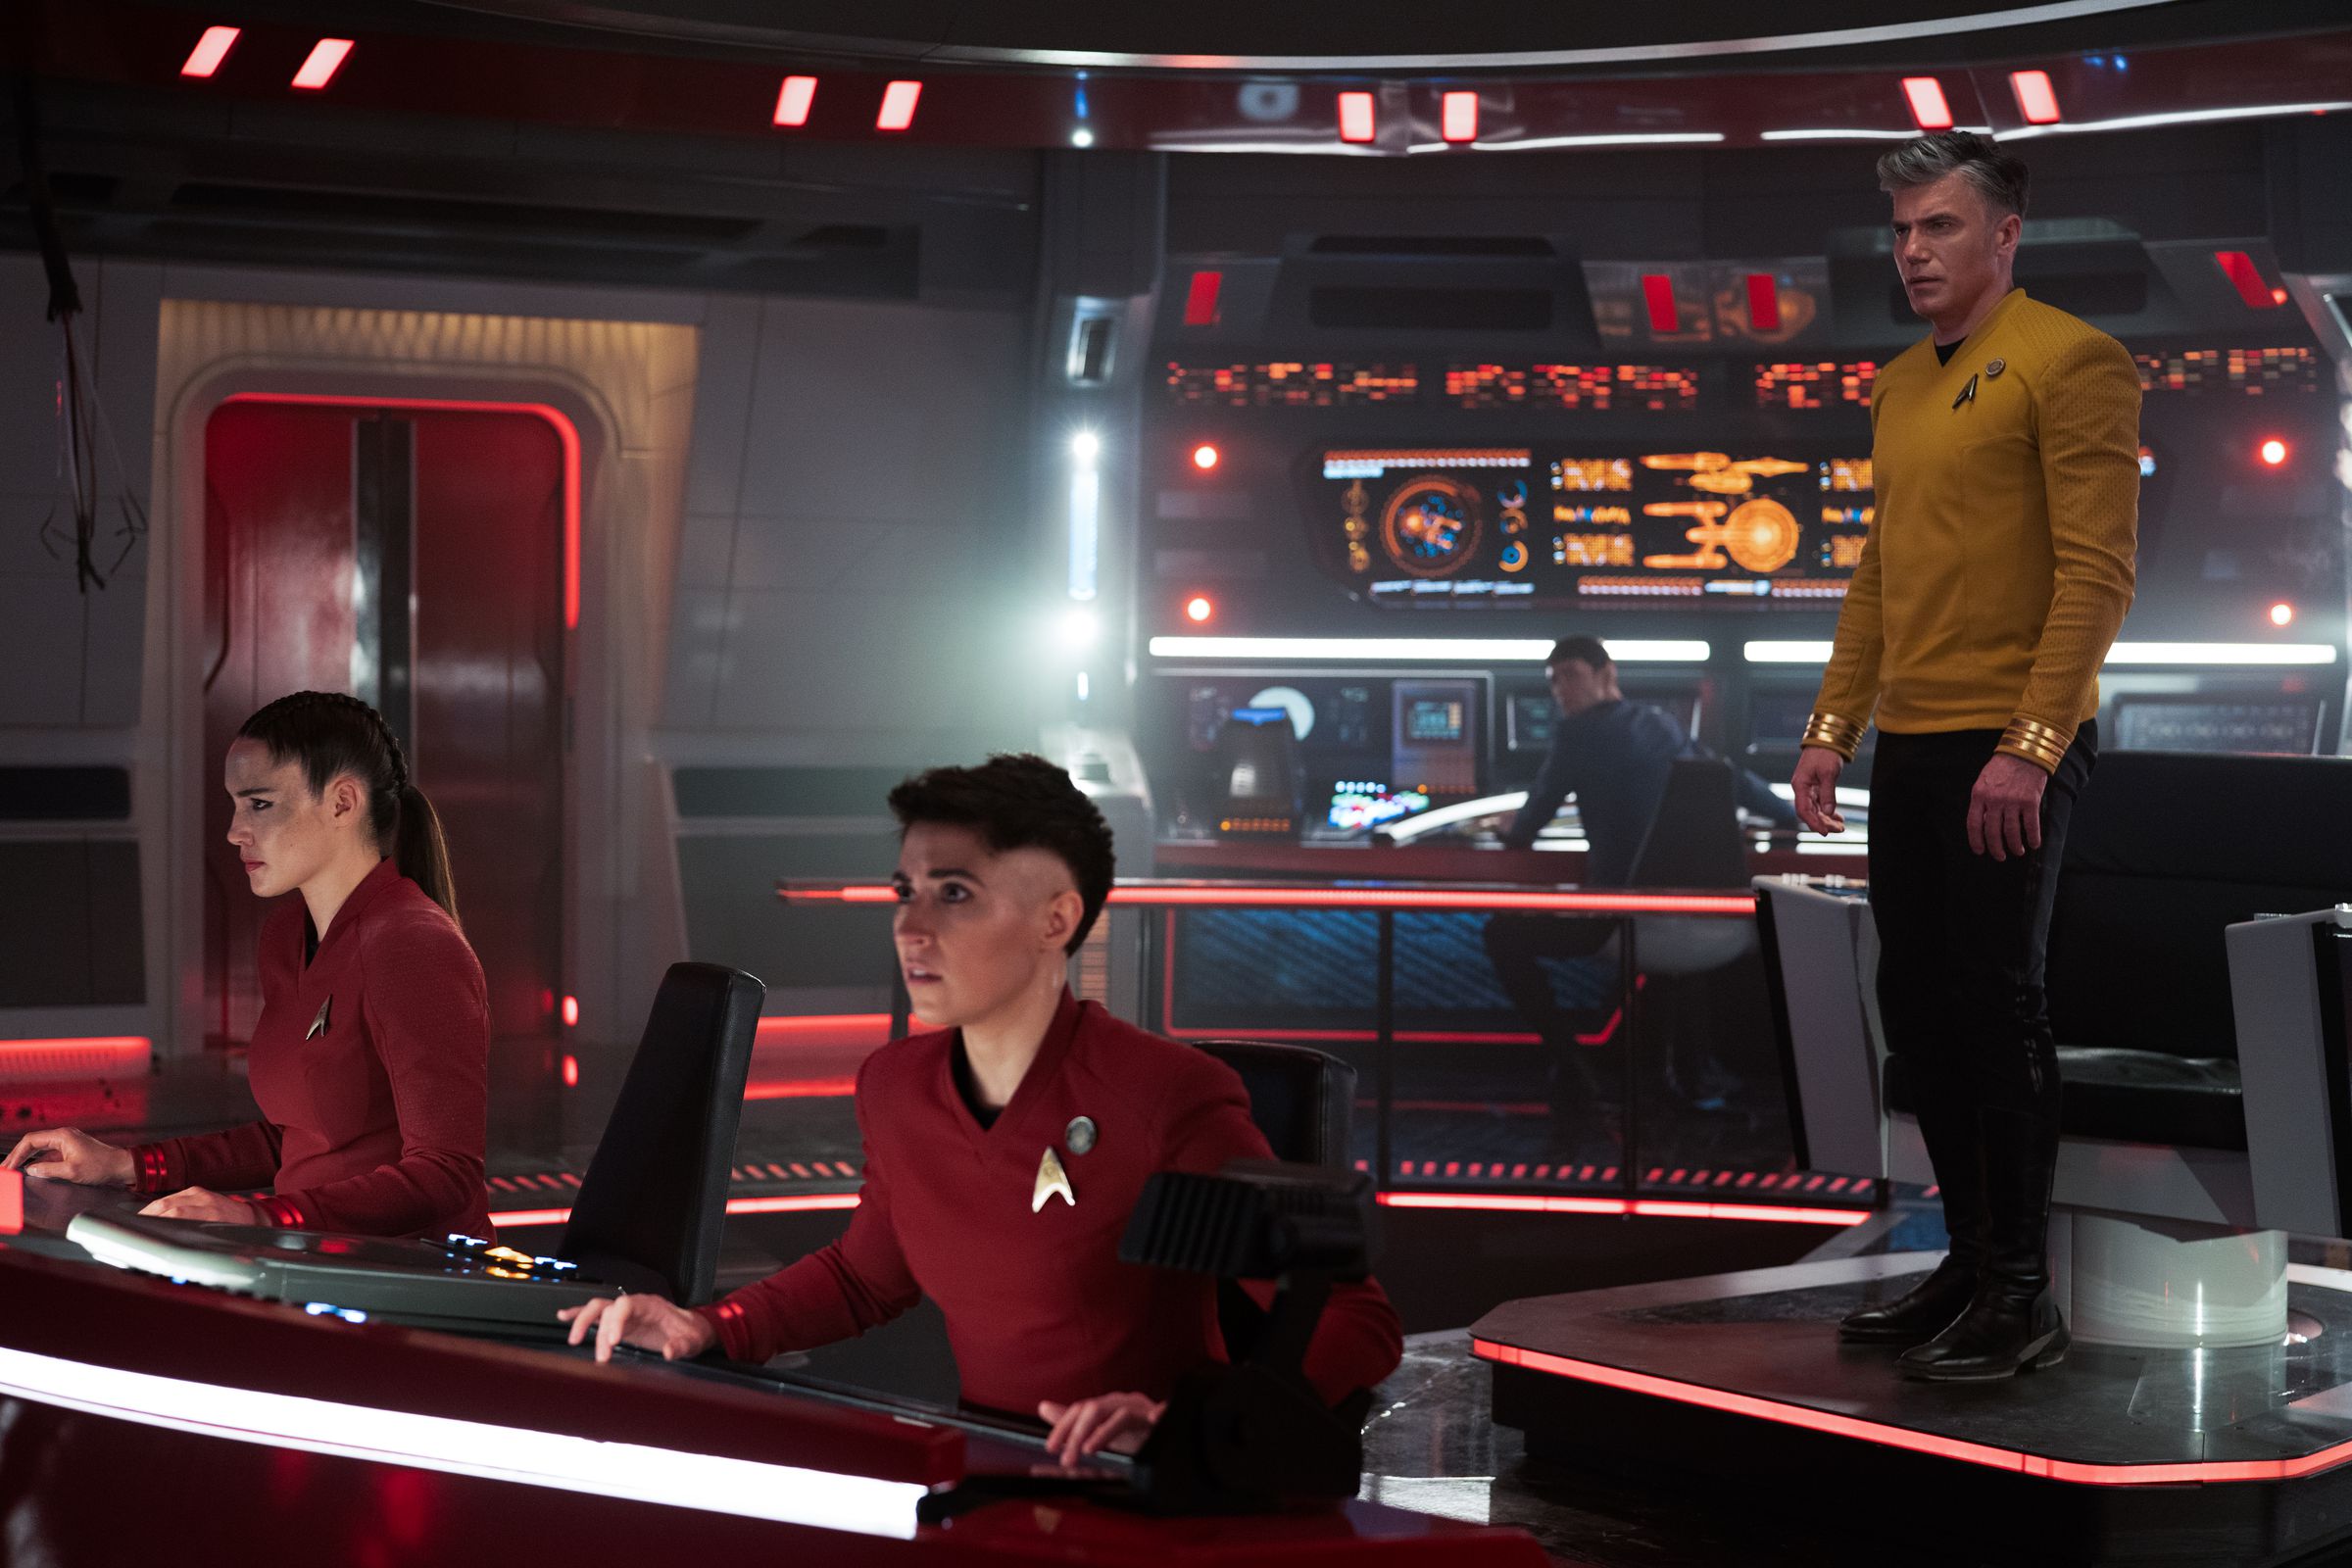 A gray-haired White man wearing yellow stands and looks at something off screen. Two women with dark hair and red shirts are seated and looking in the same direction.